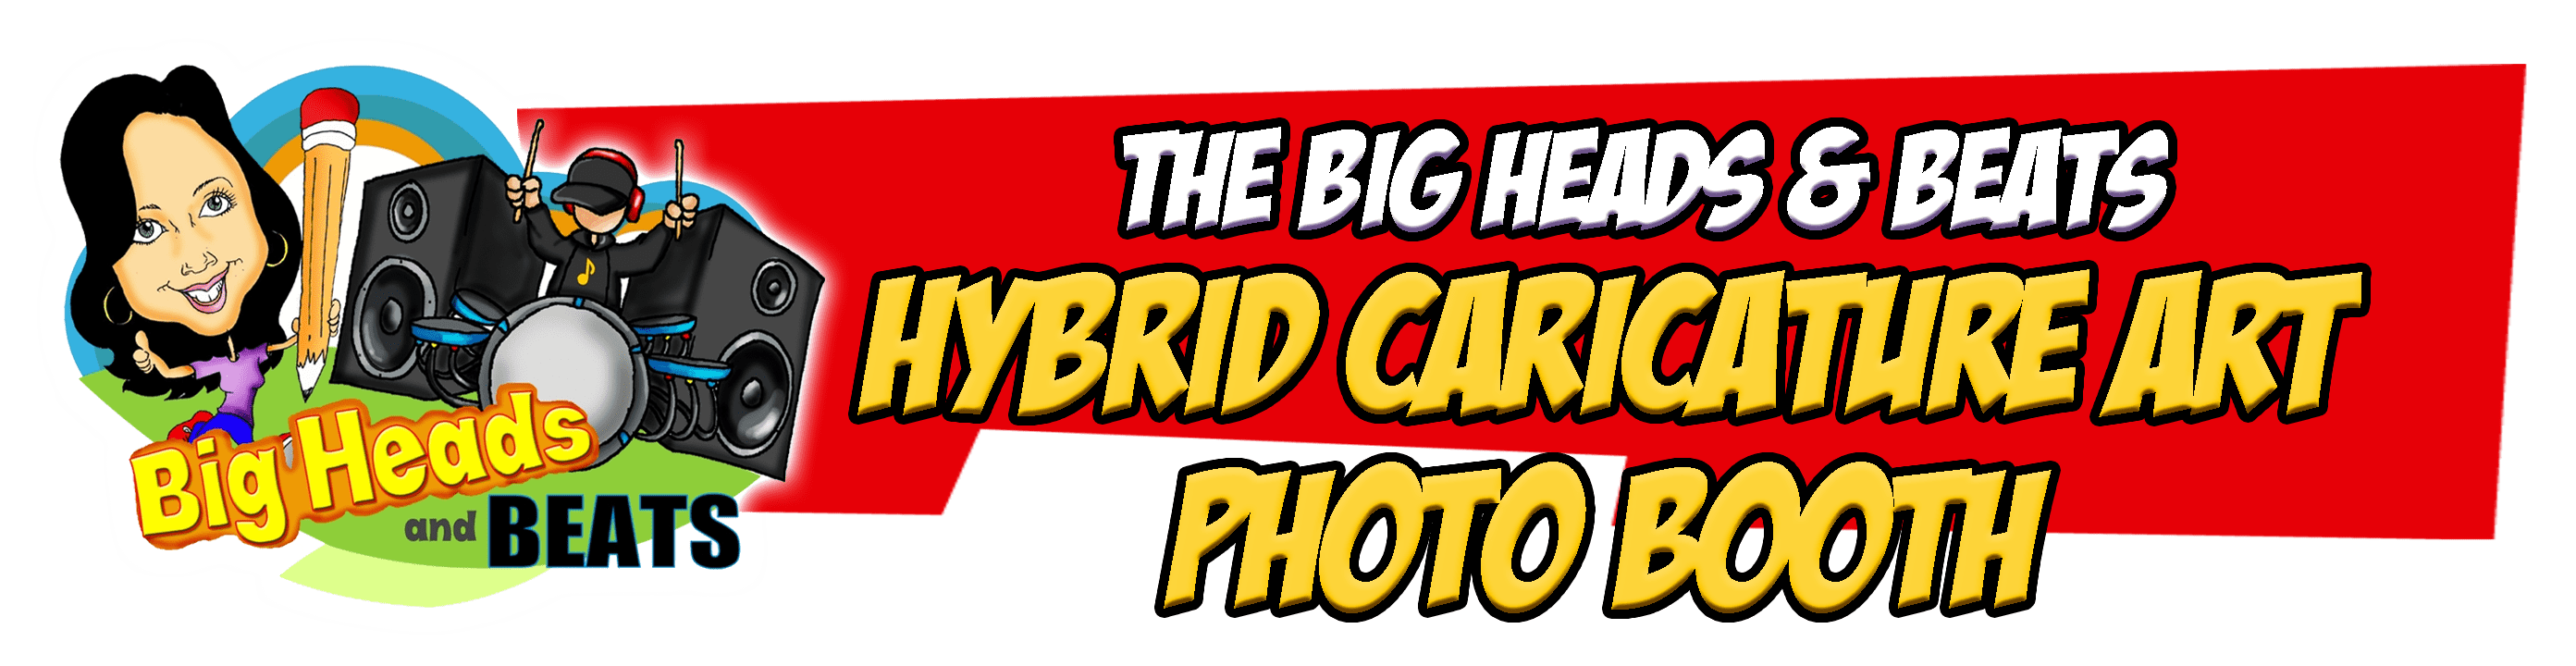 Tradeshow Caricatures, Hybrid Caricature Art Photo Booth, Hybrid Events, Hybrid Event, Live Event Caricatures, Caricature Artist, Trade Show Caricatures, Conference Tradeshow, Caricature Artist, Virtual Caricatures, Event Technology, Corporate Event Ideas, Trade Show Booth Ideas,